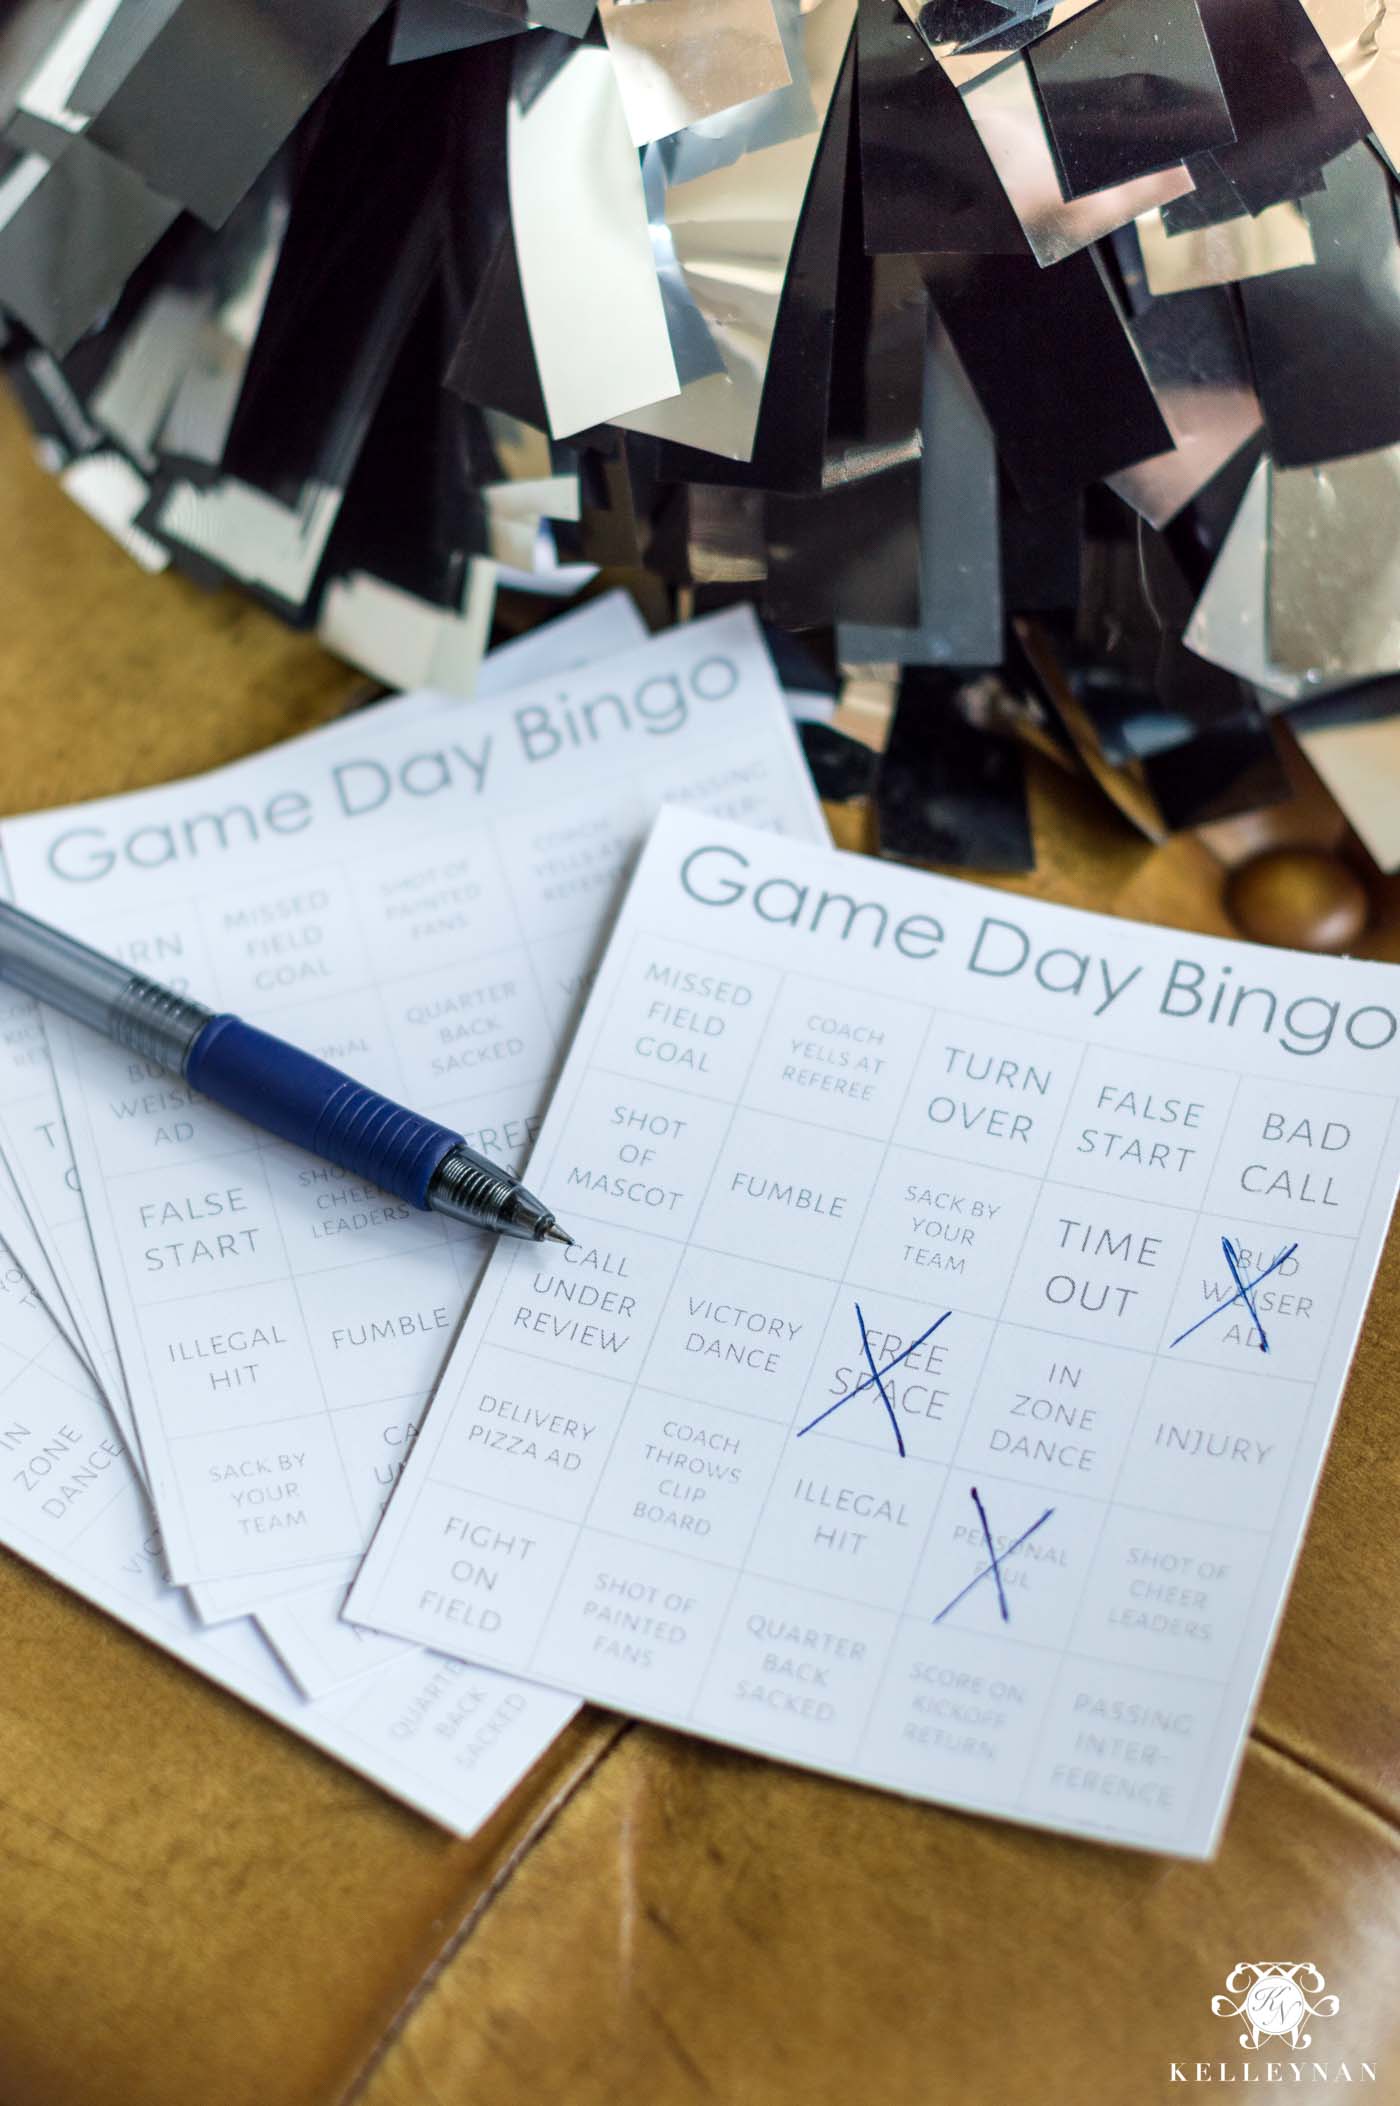 Football game bingo cards to play watching the game